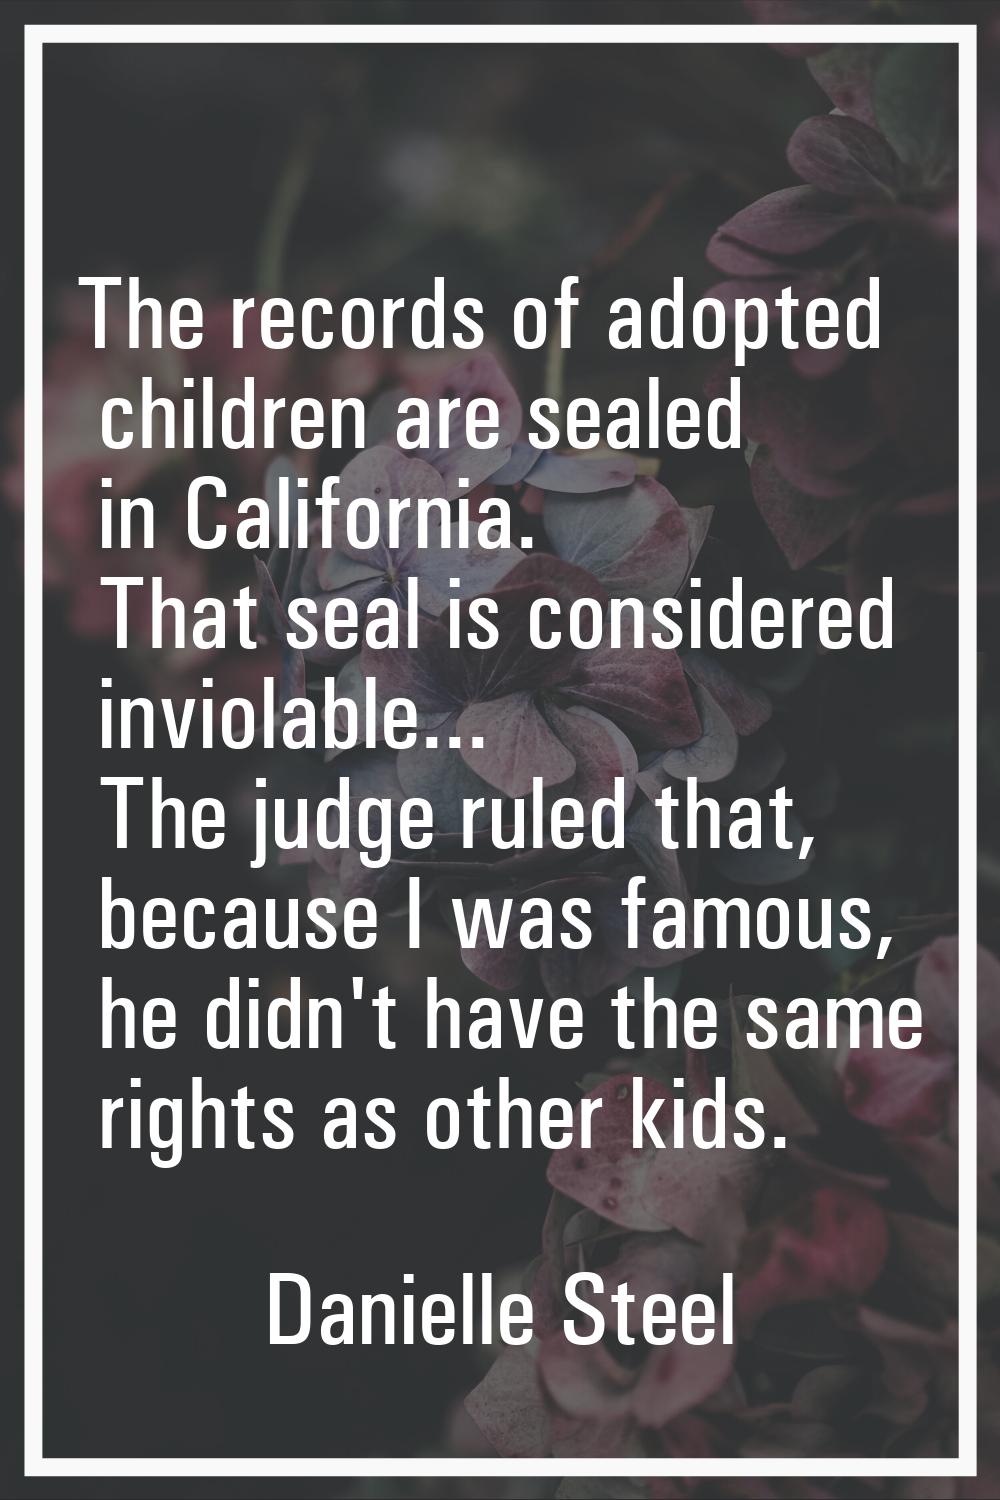 The records of adopted children are sealed in California. That seal is considered inviolable... The